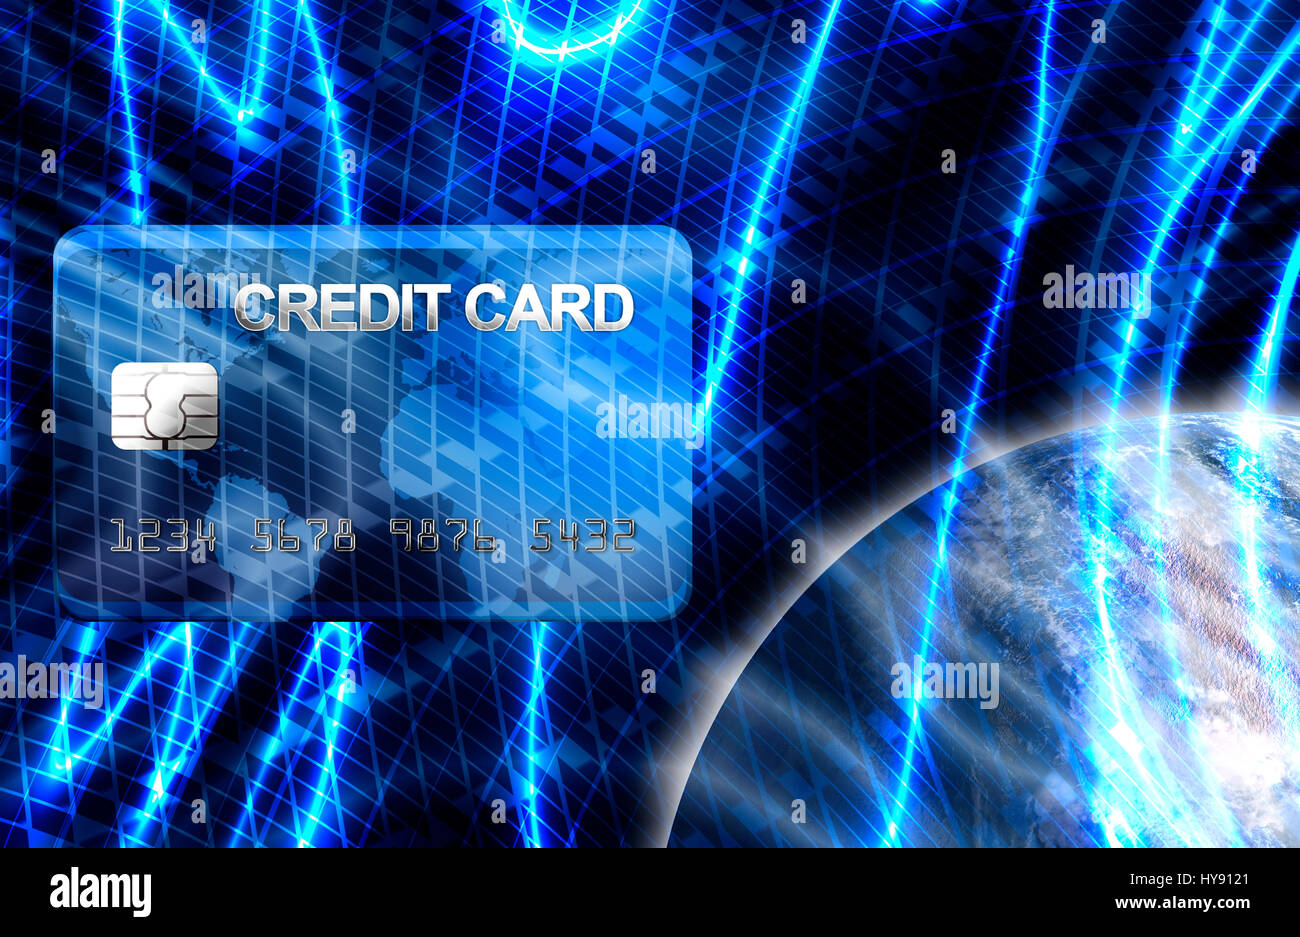 Abstract Digital virtual financial high-tech business background with bright blue colors and special effects. Stock Photo